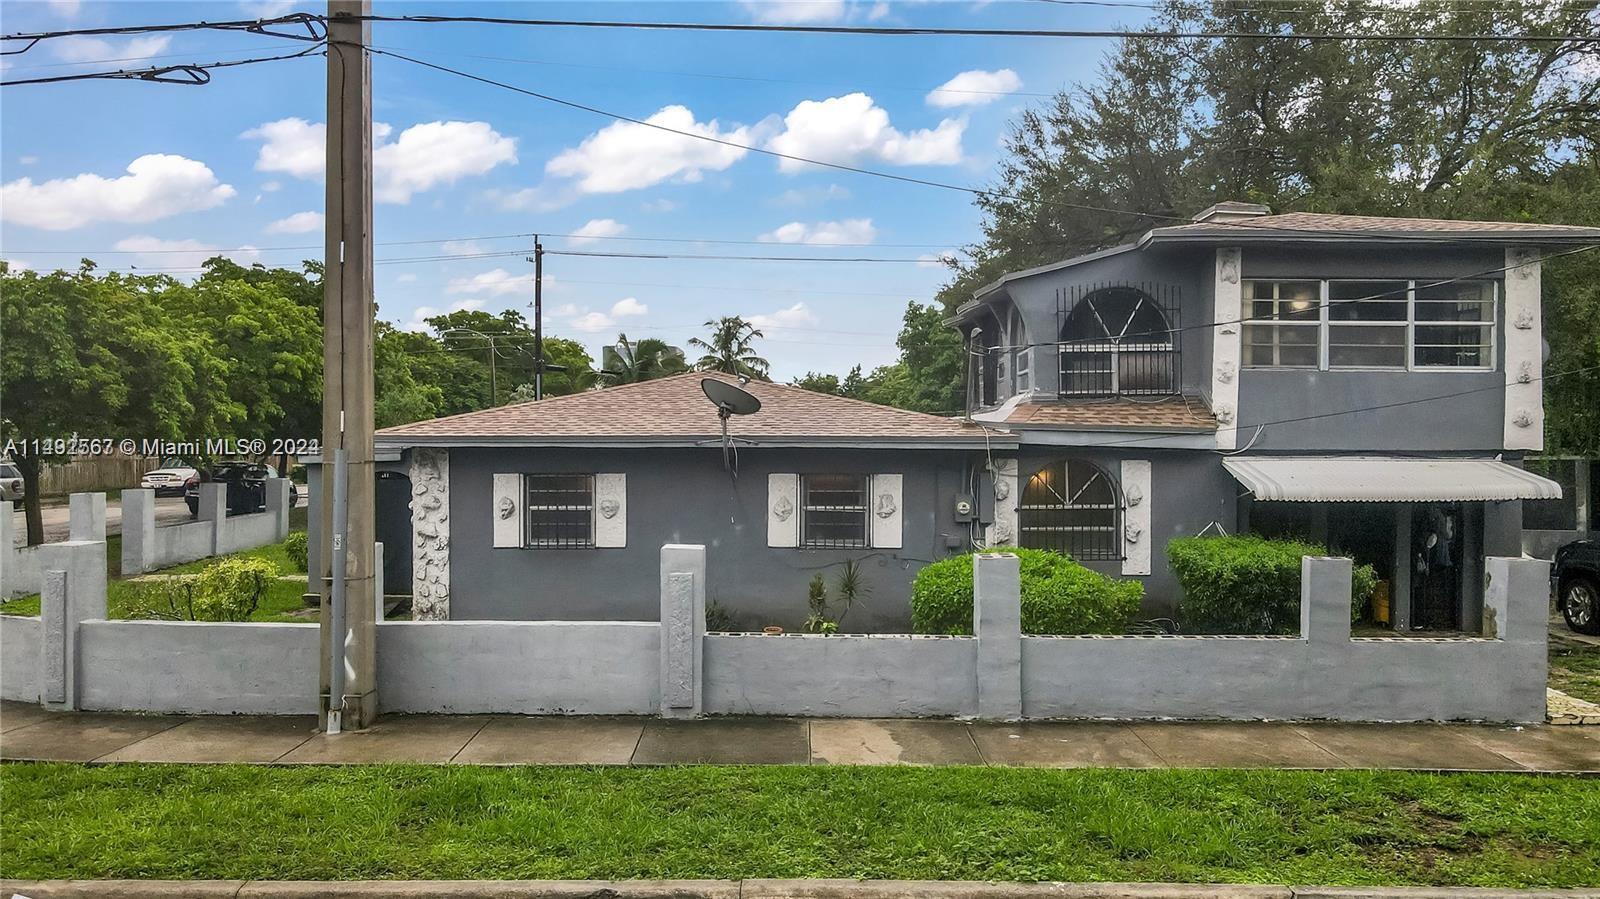 Photo of 4030 NW 1st Ave in Miami, FL